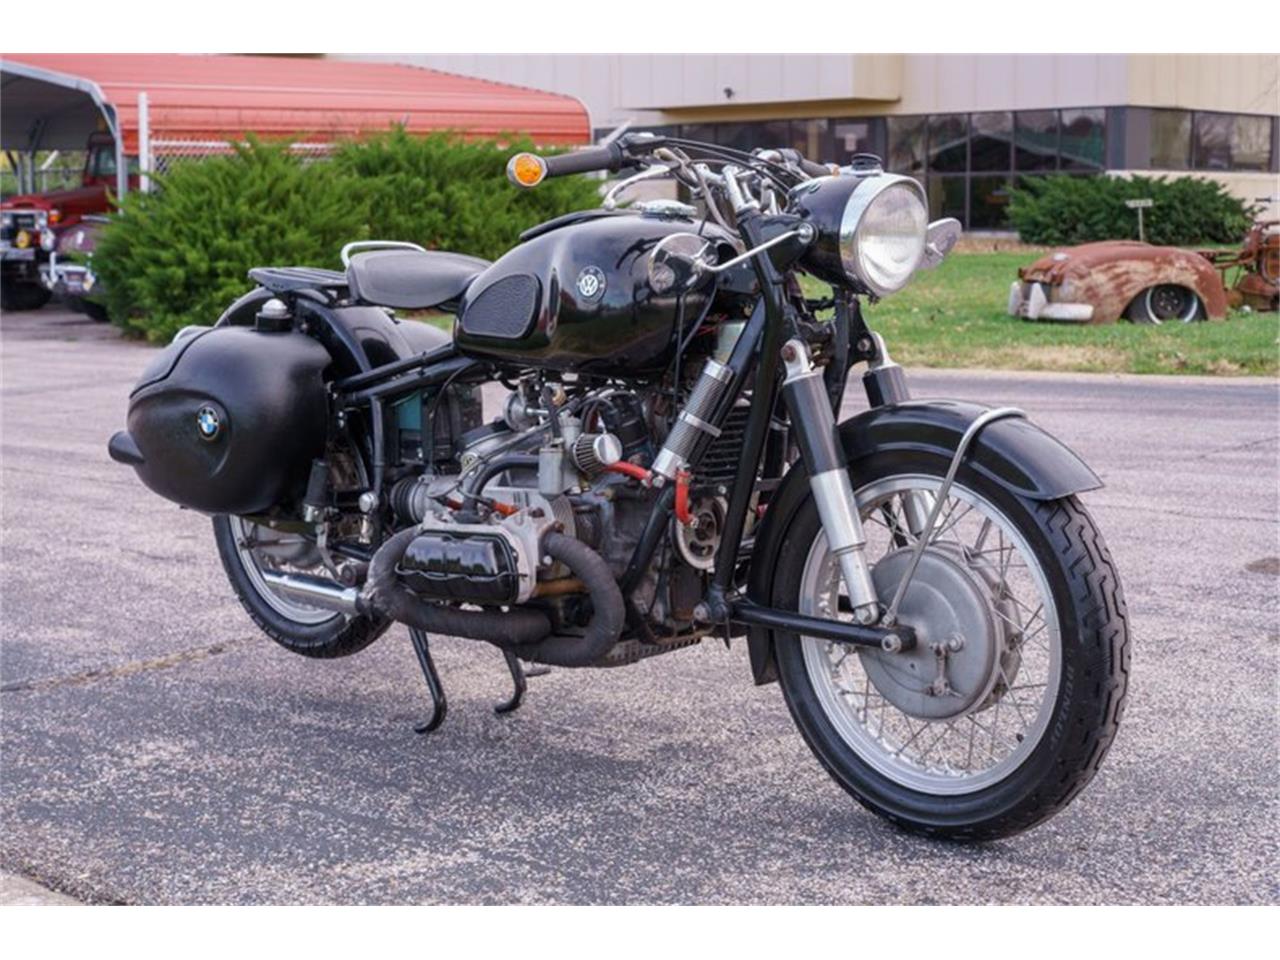 1968 BMW Motorcycle for Sale | ClassicCars.com | CC-1697053